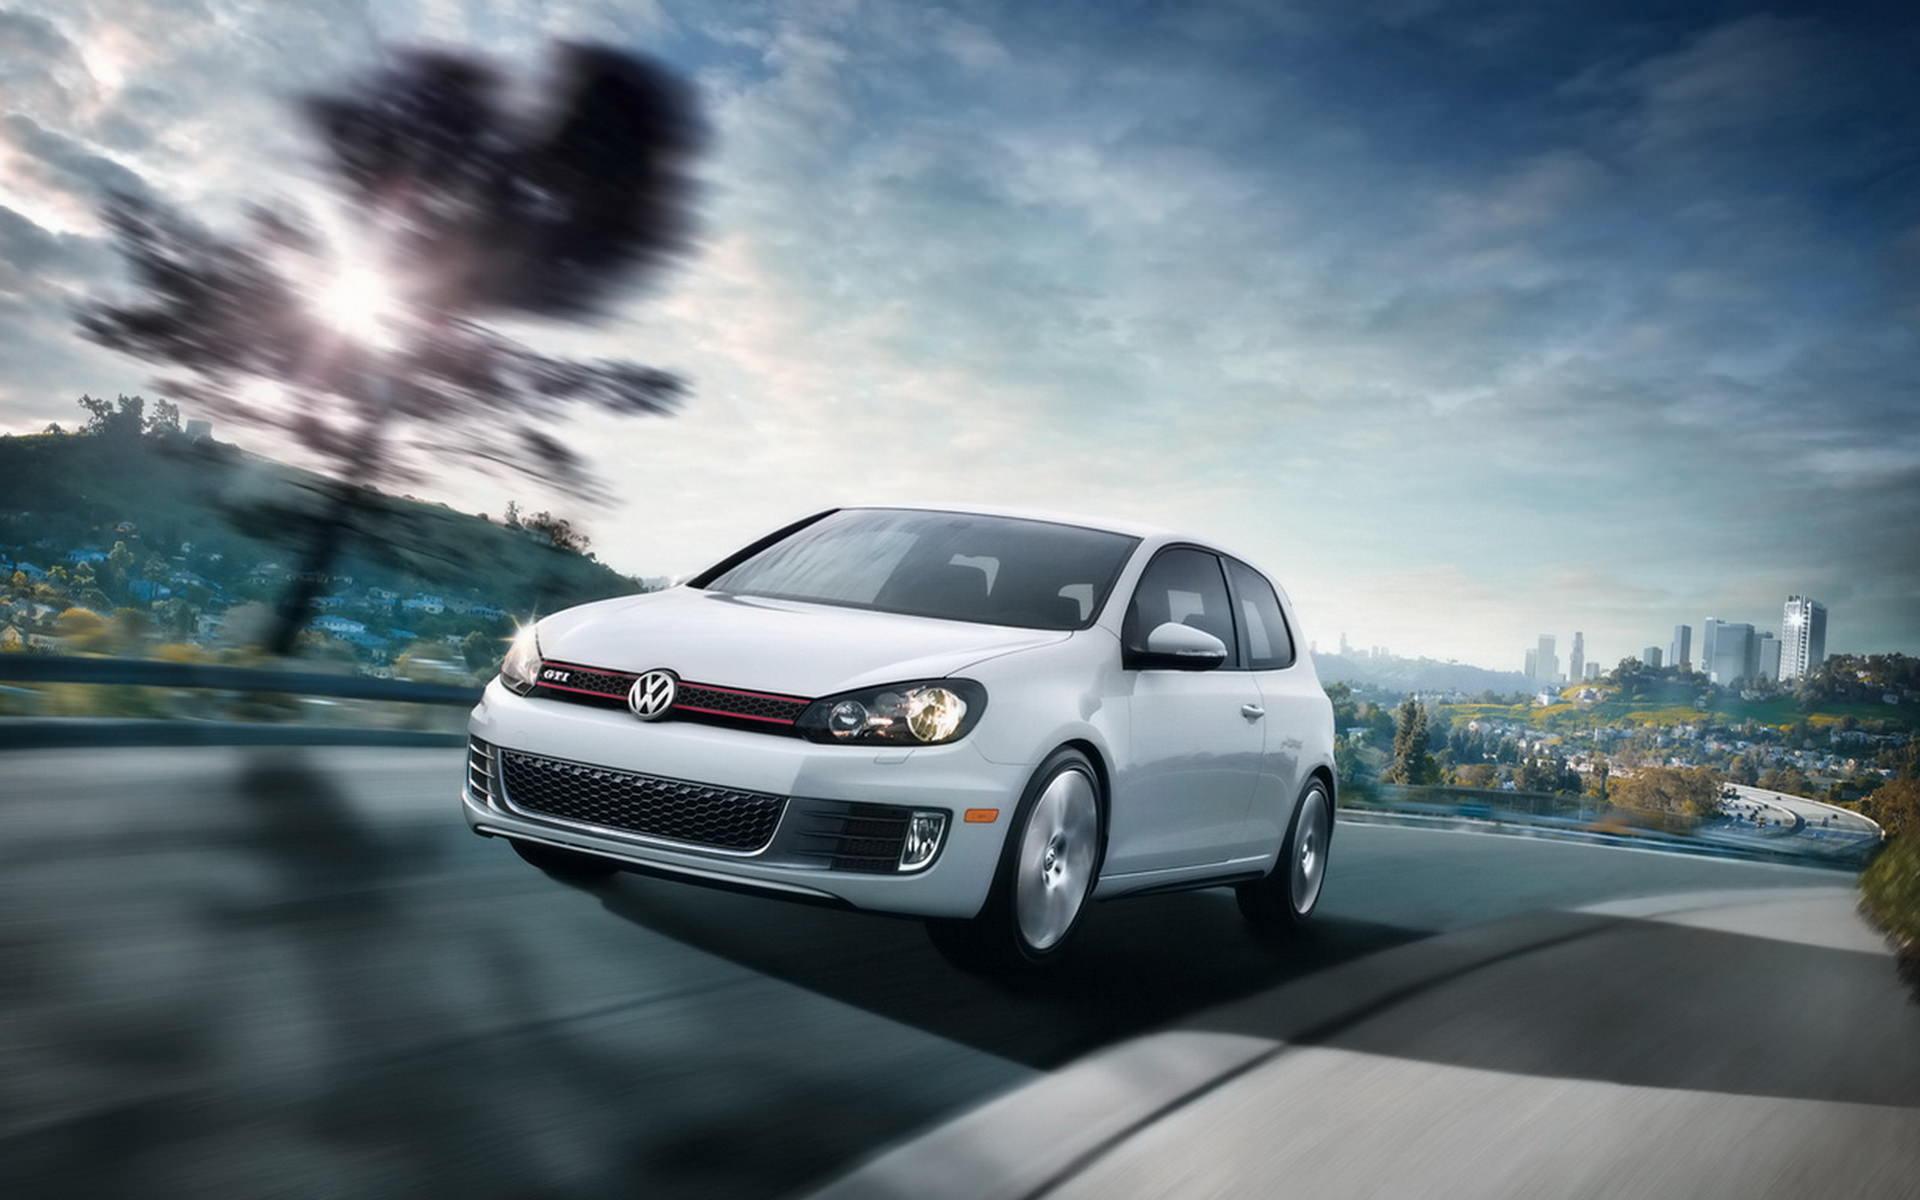 Volkswagen Golf GTI wallpaper and image, picture, photo